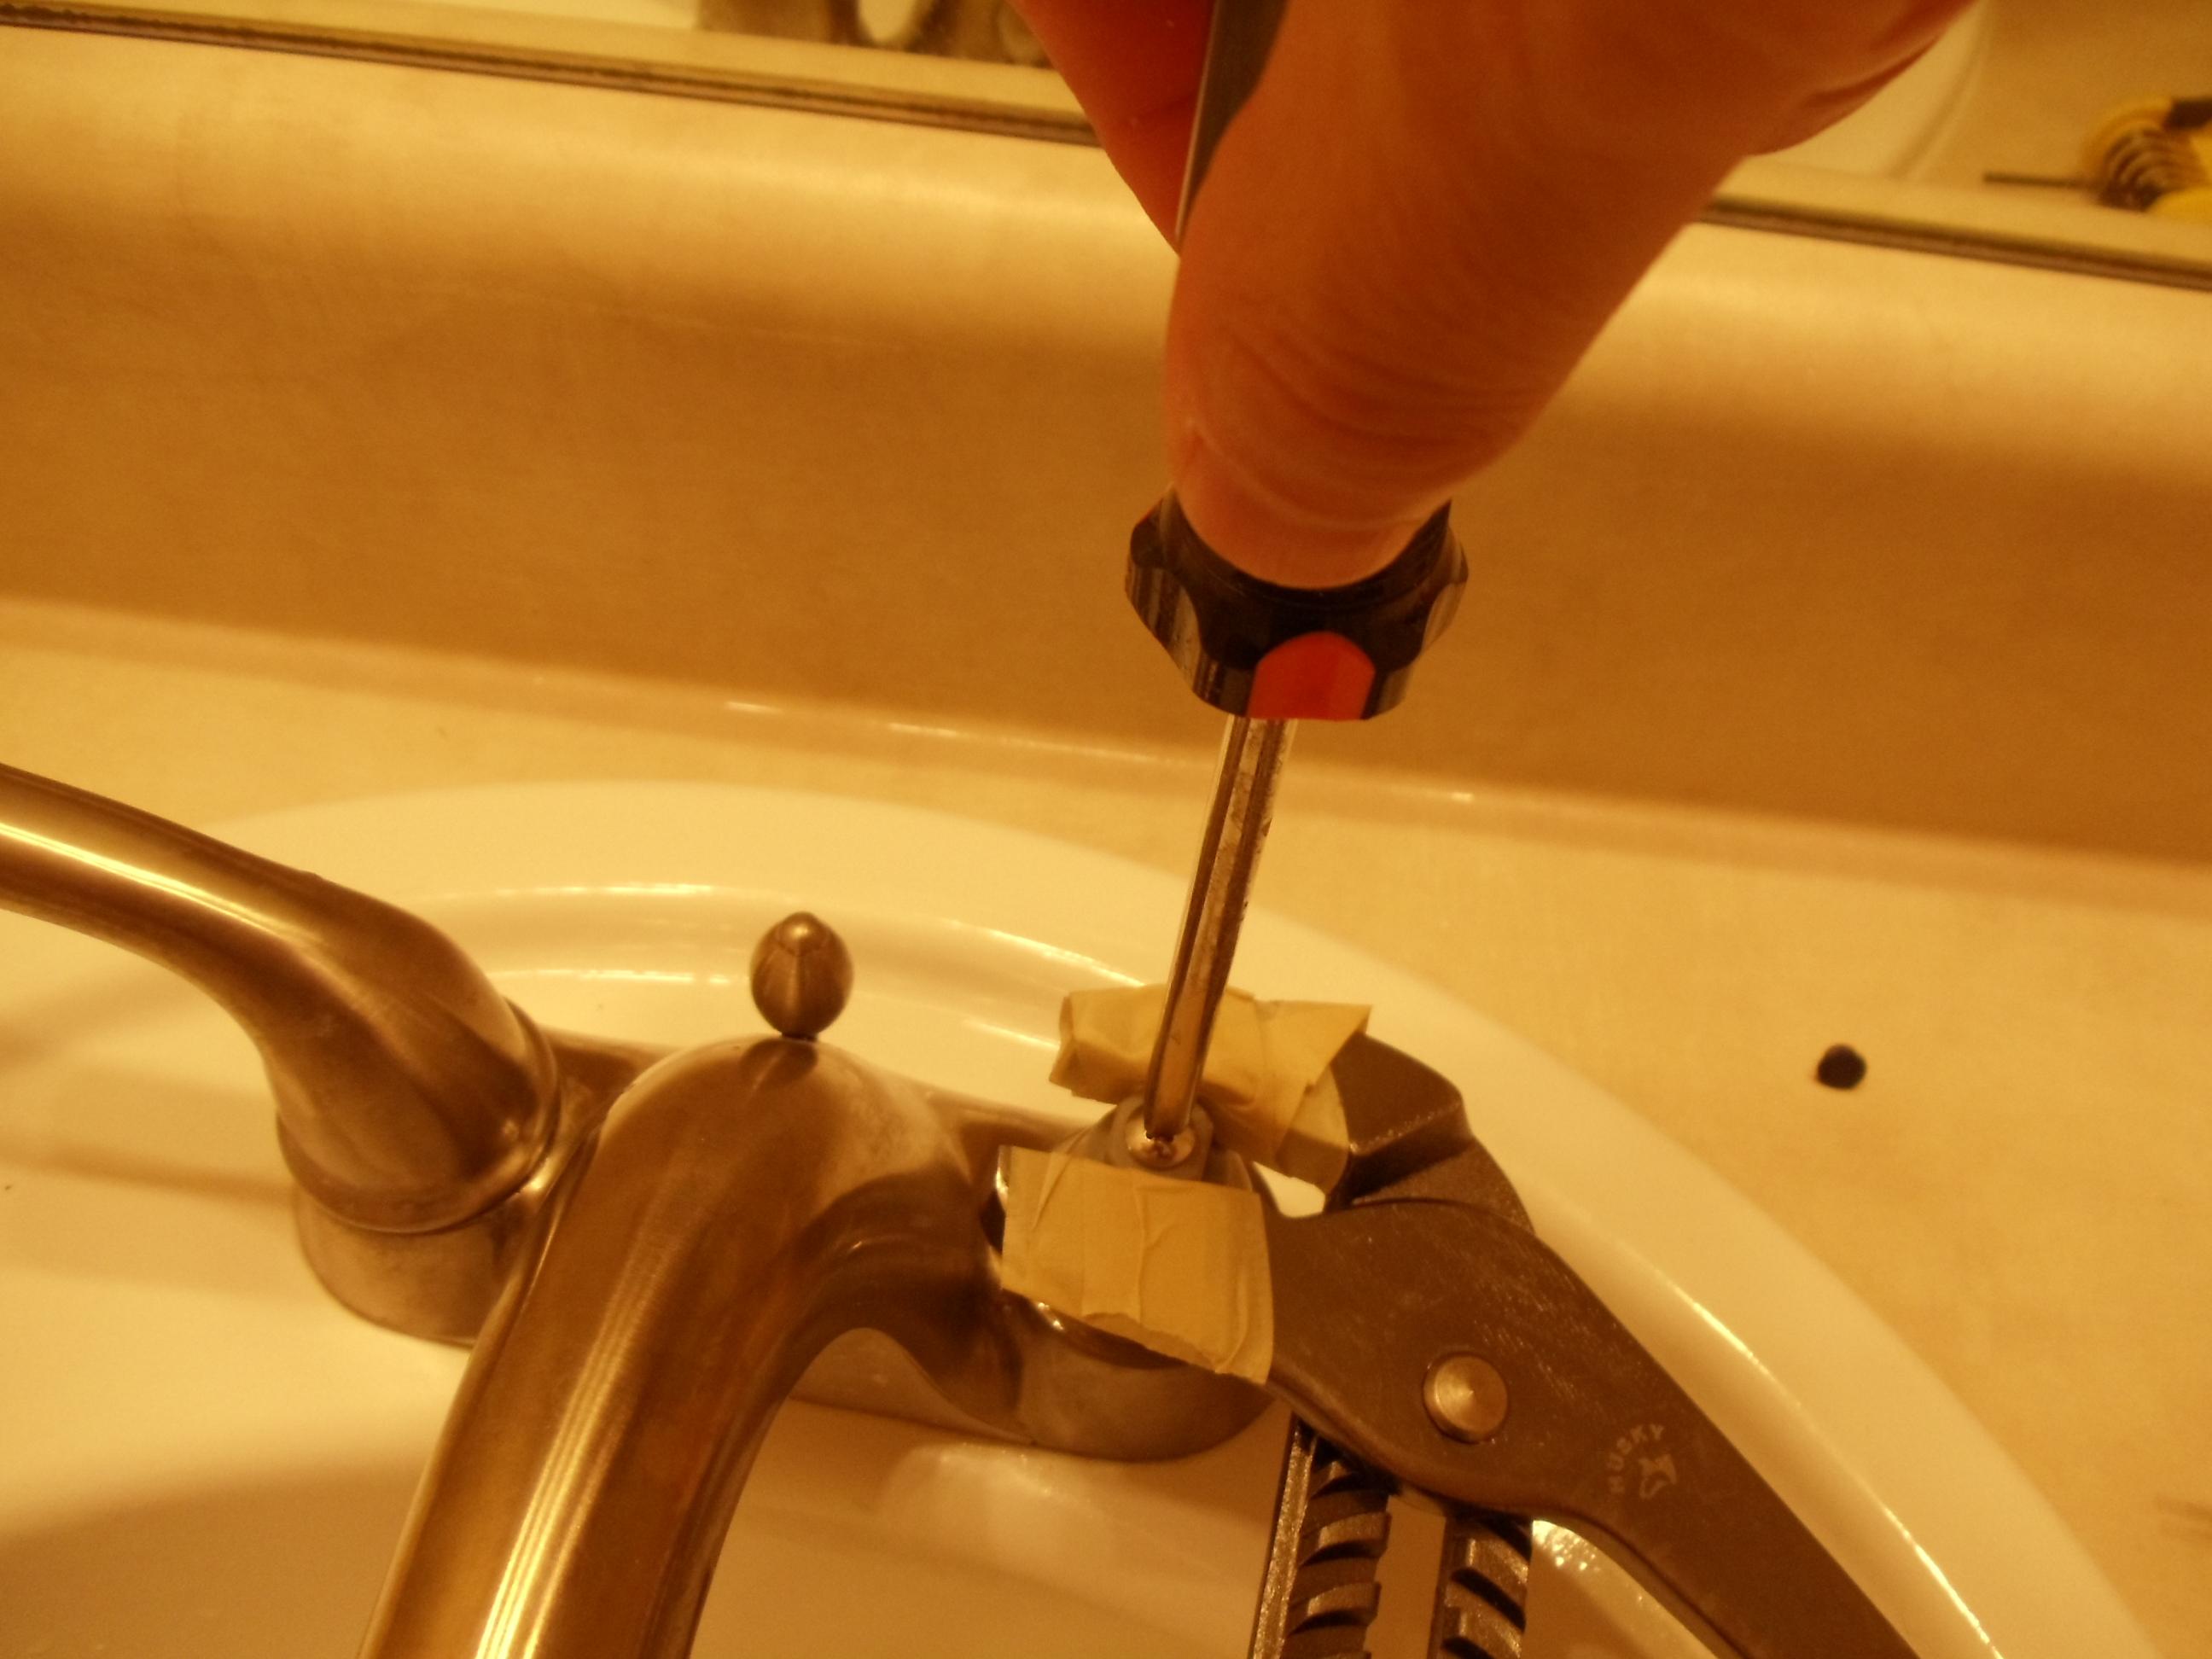 How To Fix A Leaking Glacier Bay Bathroom Sink Faucet Diy Home Repair - How To Fix A Dripping Glacier Bay Bathroom Faucet